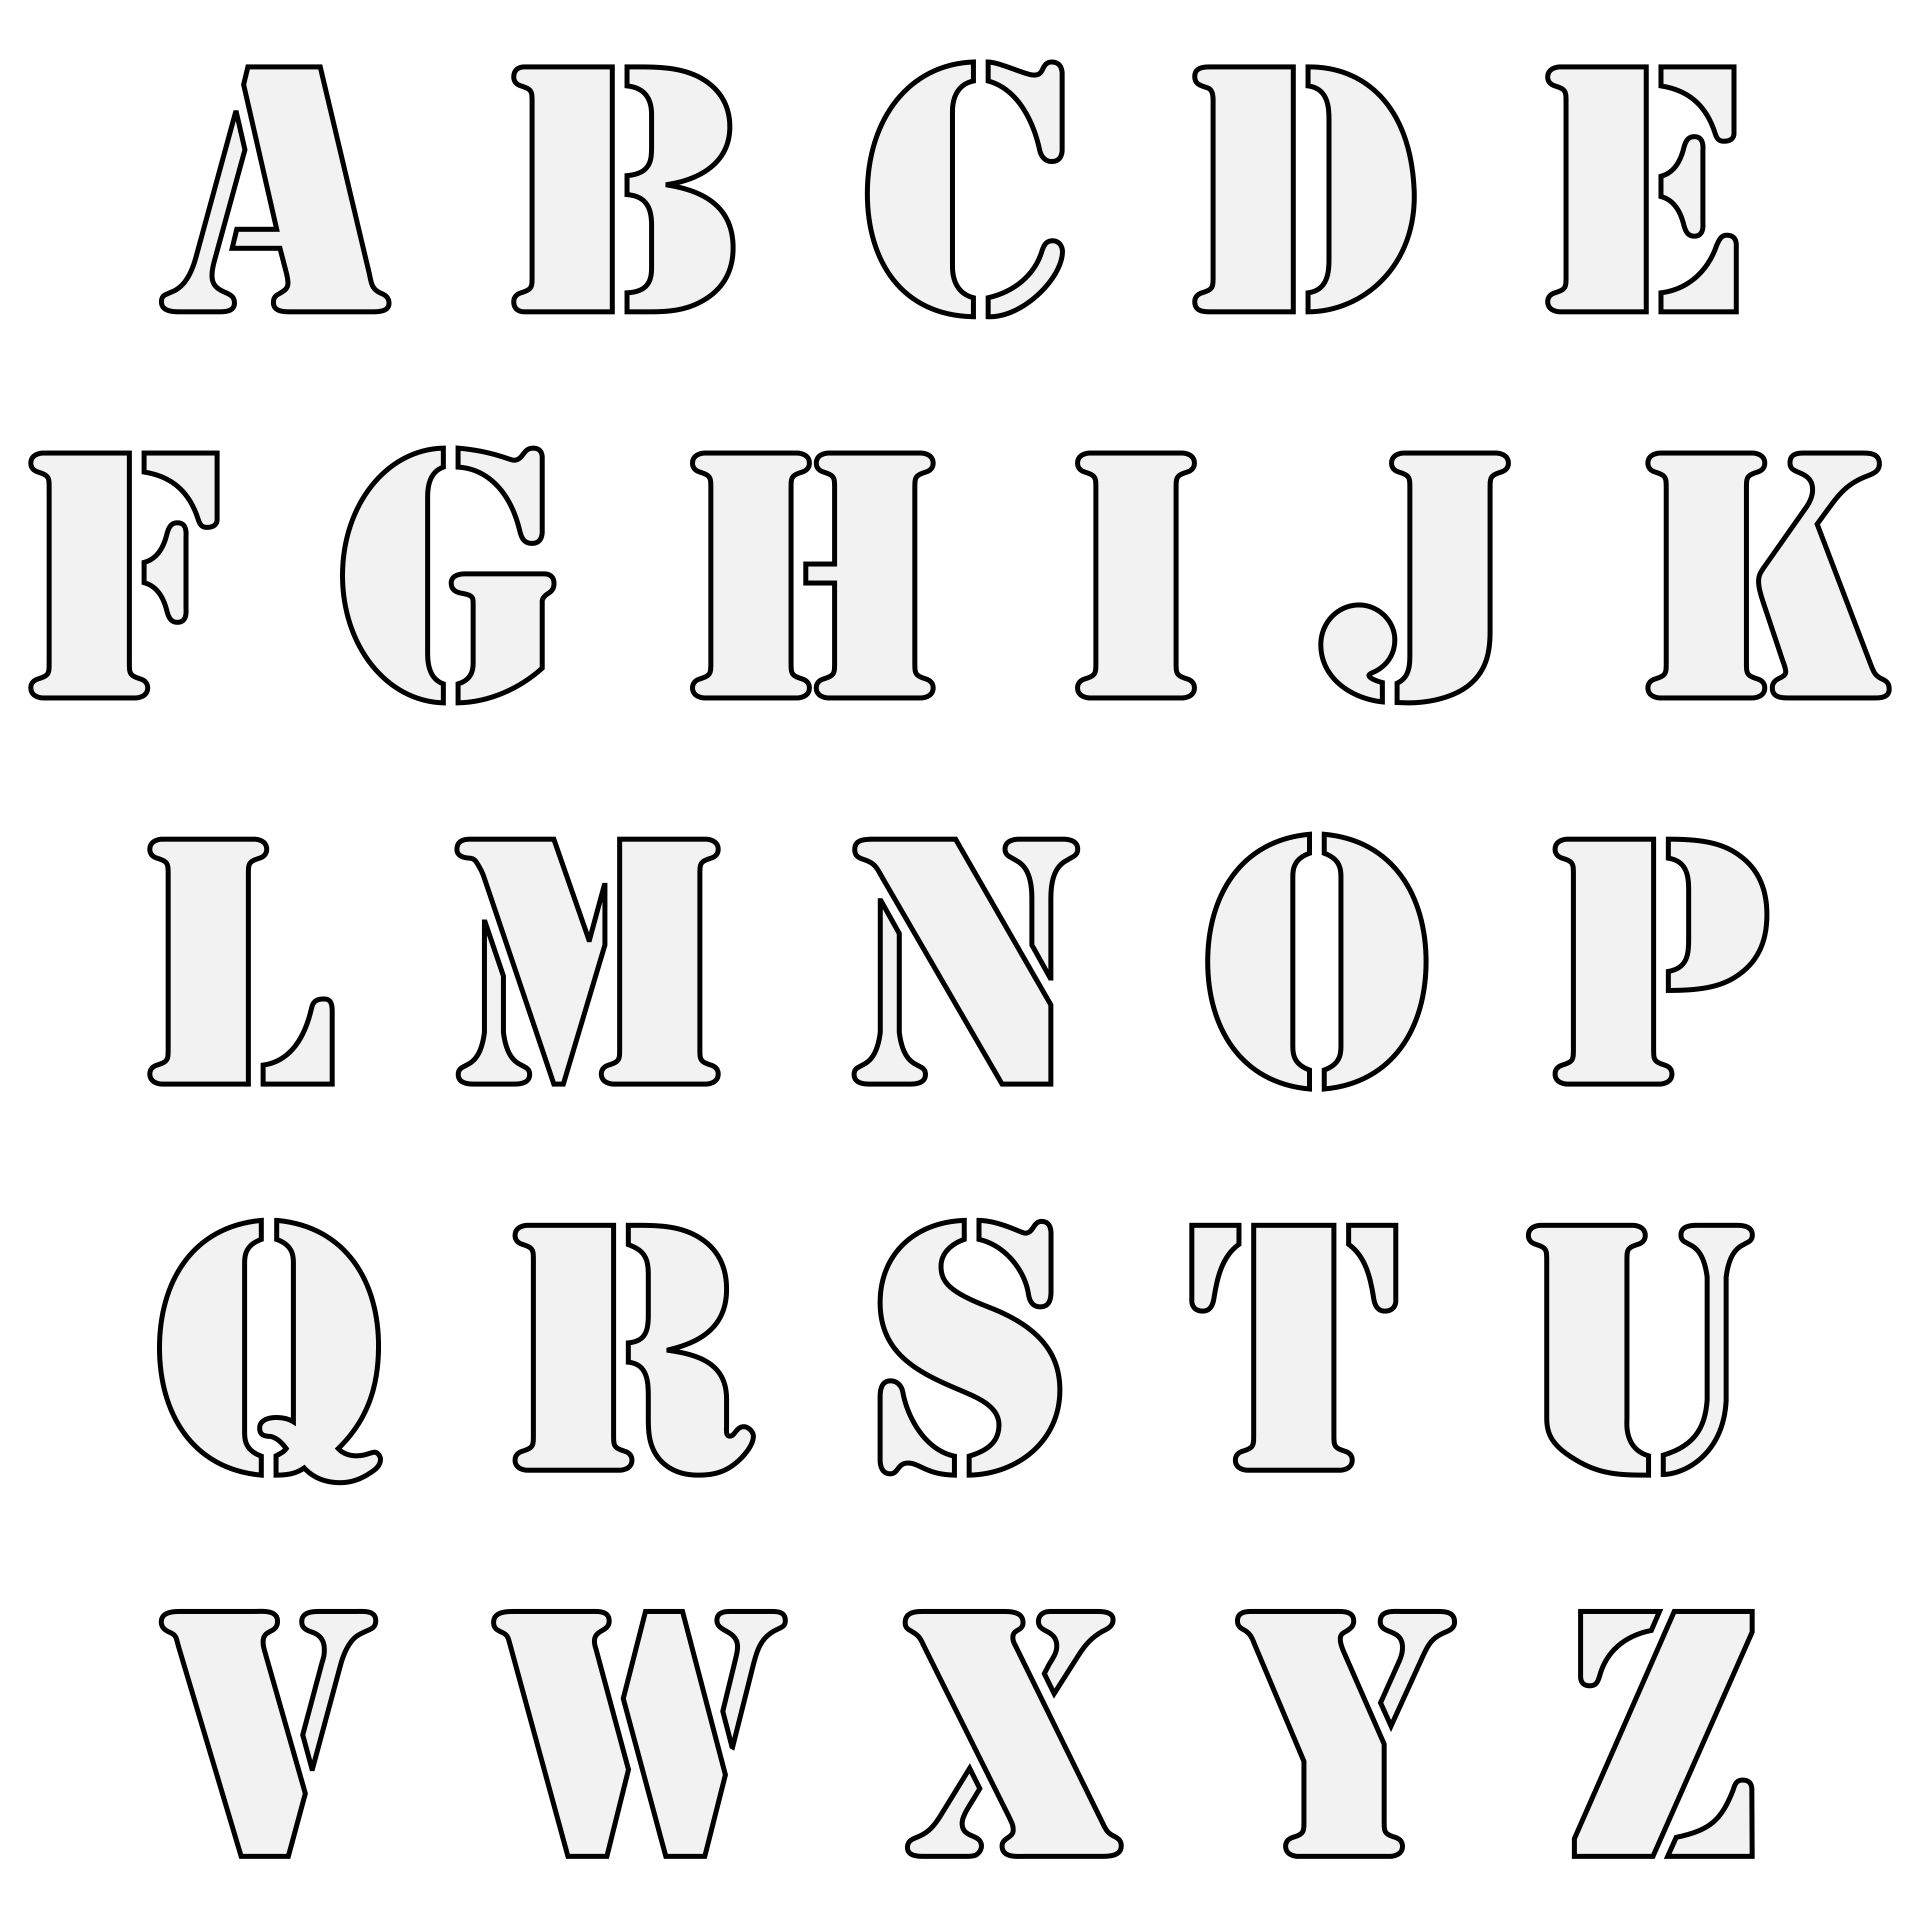 10-best-printable-cut-out-letters-printableecom-2-inch-printable